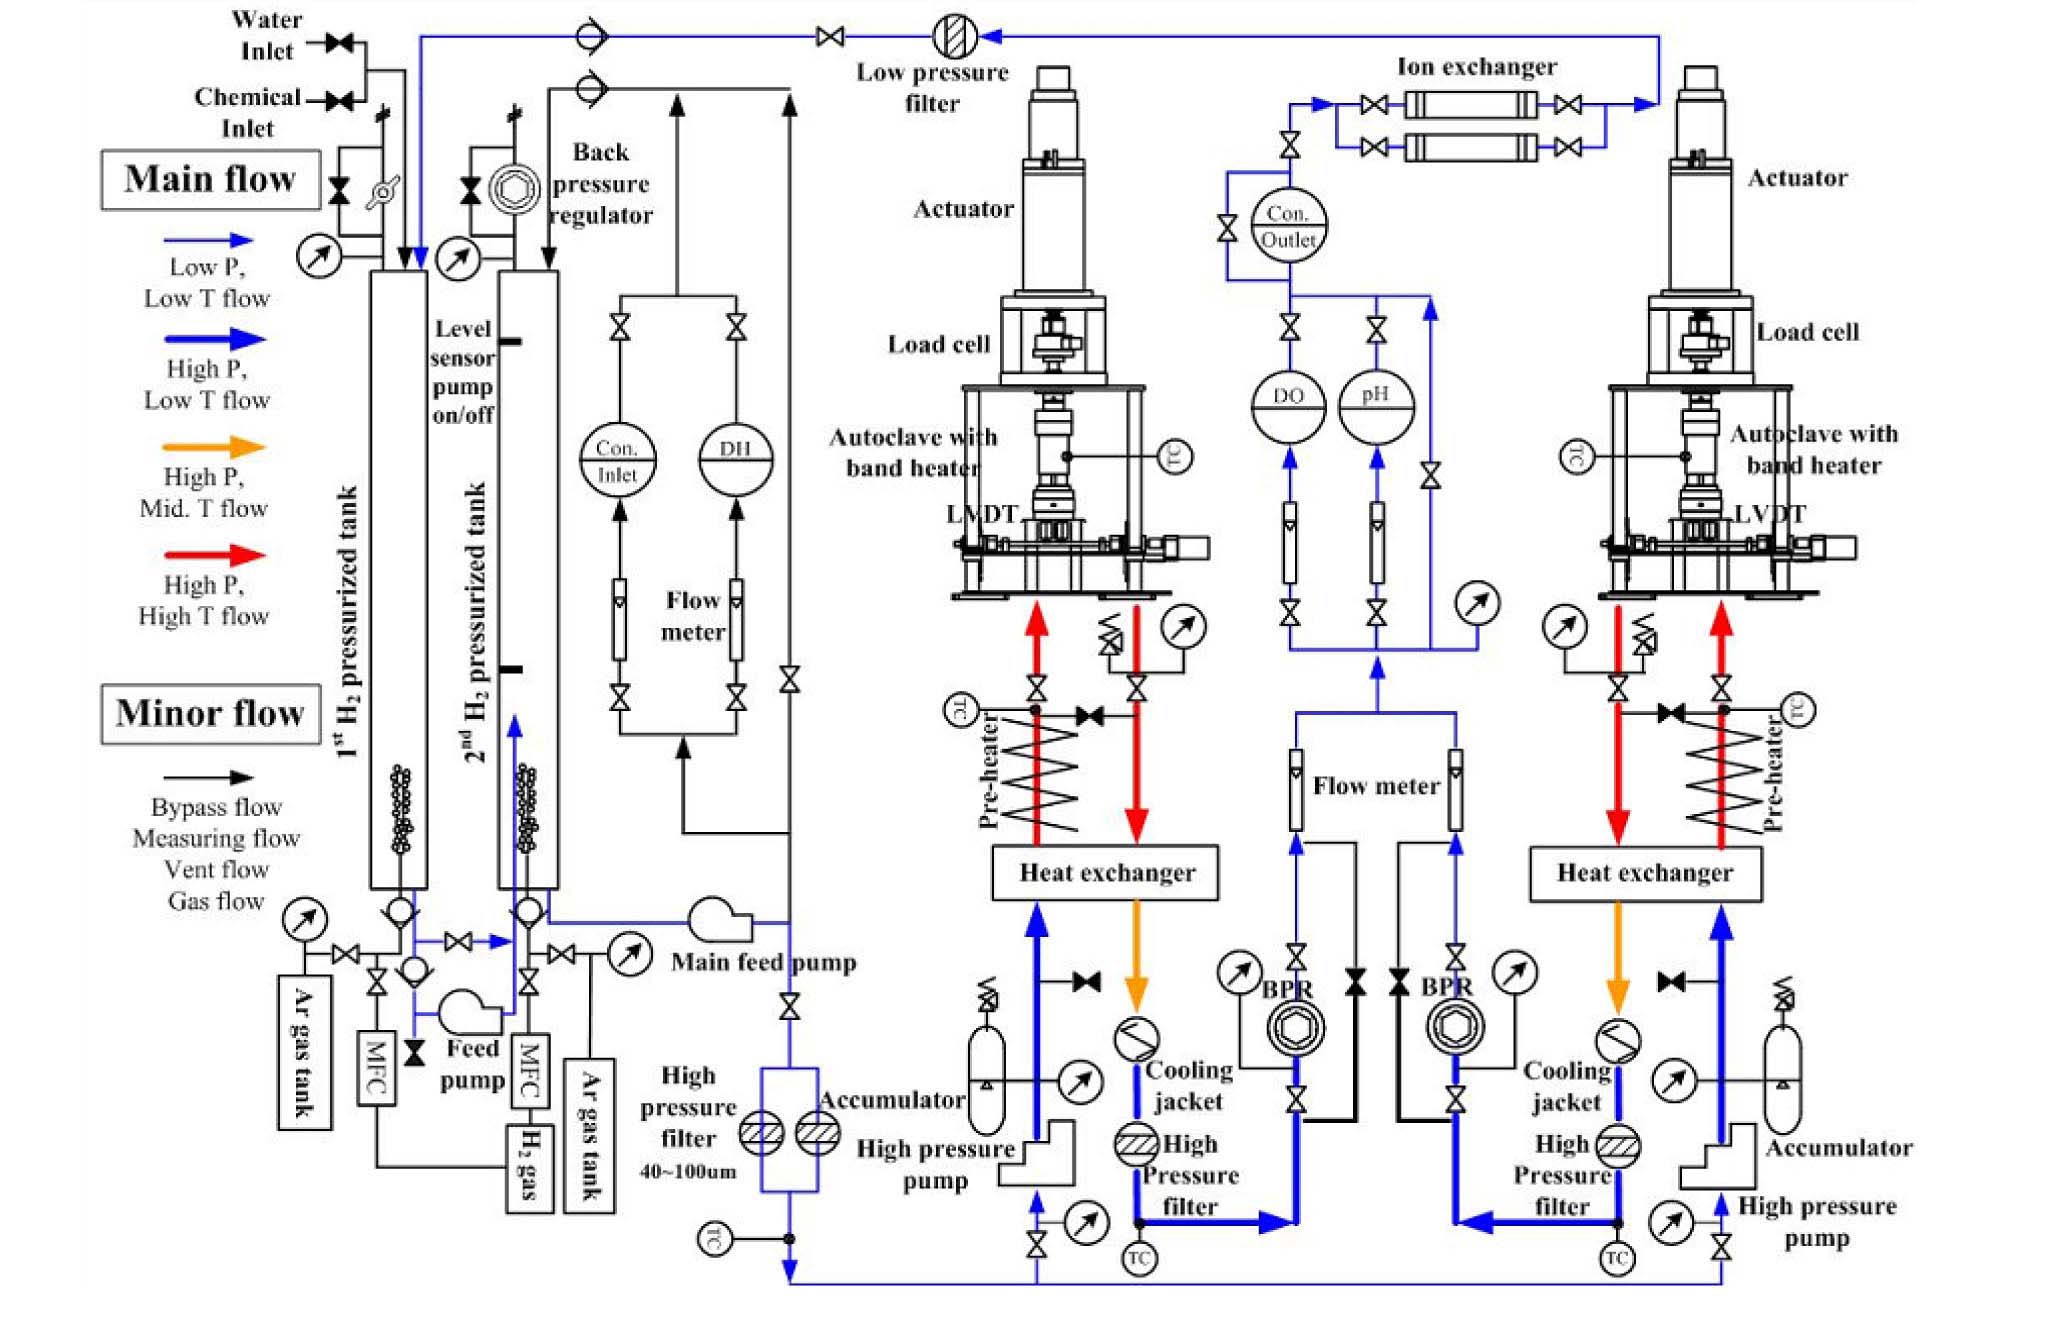 Schematics of the Environmental Fatigue Test System